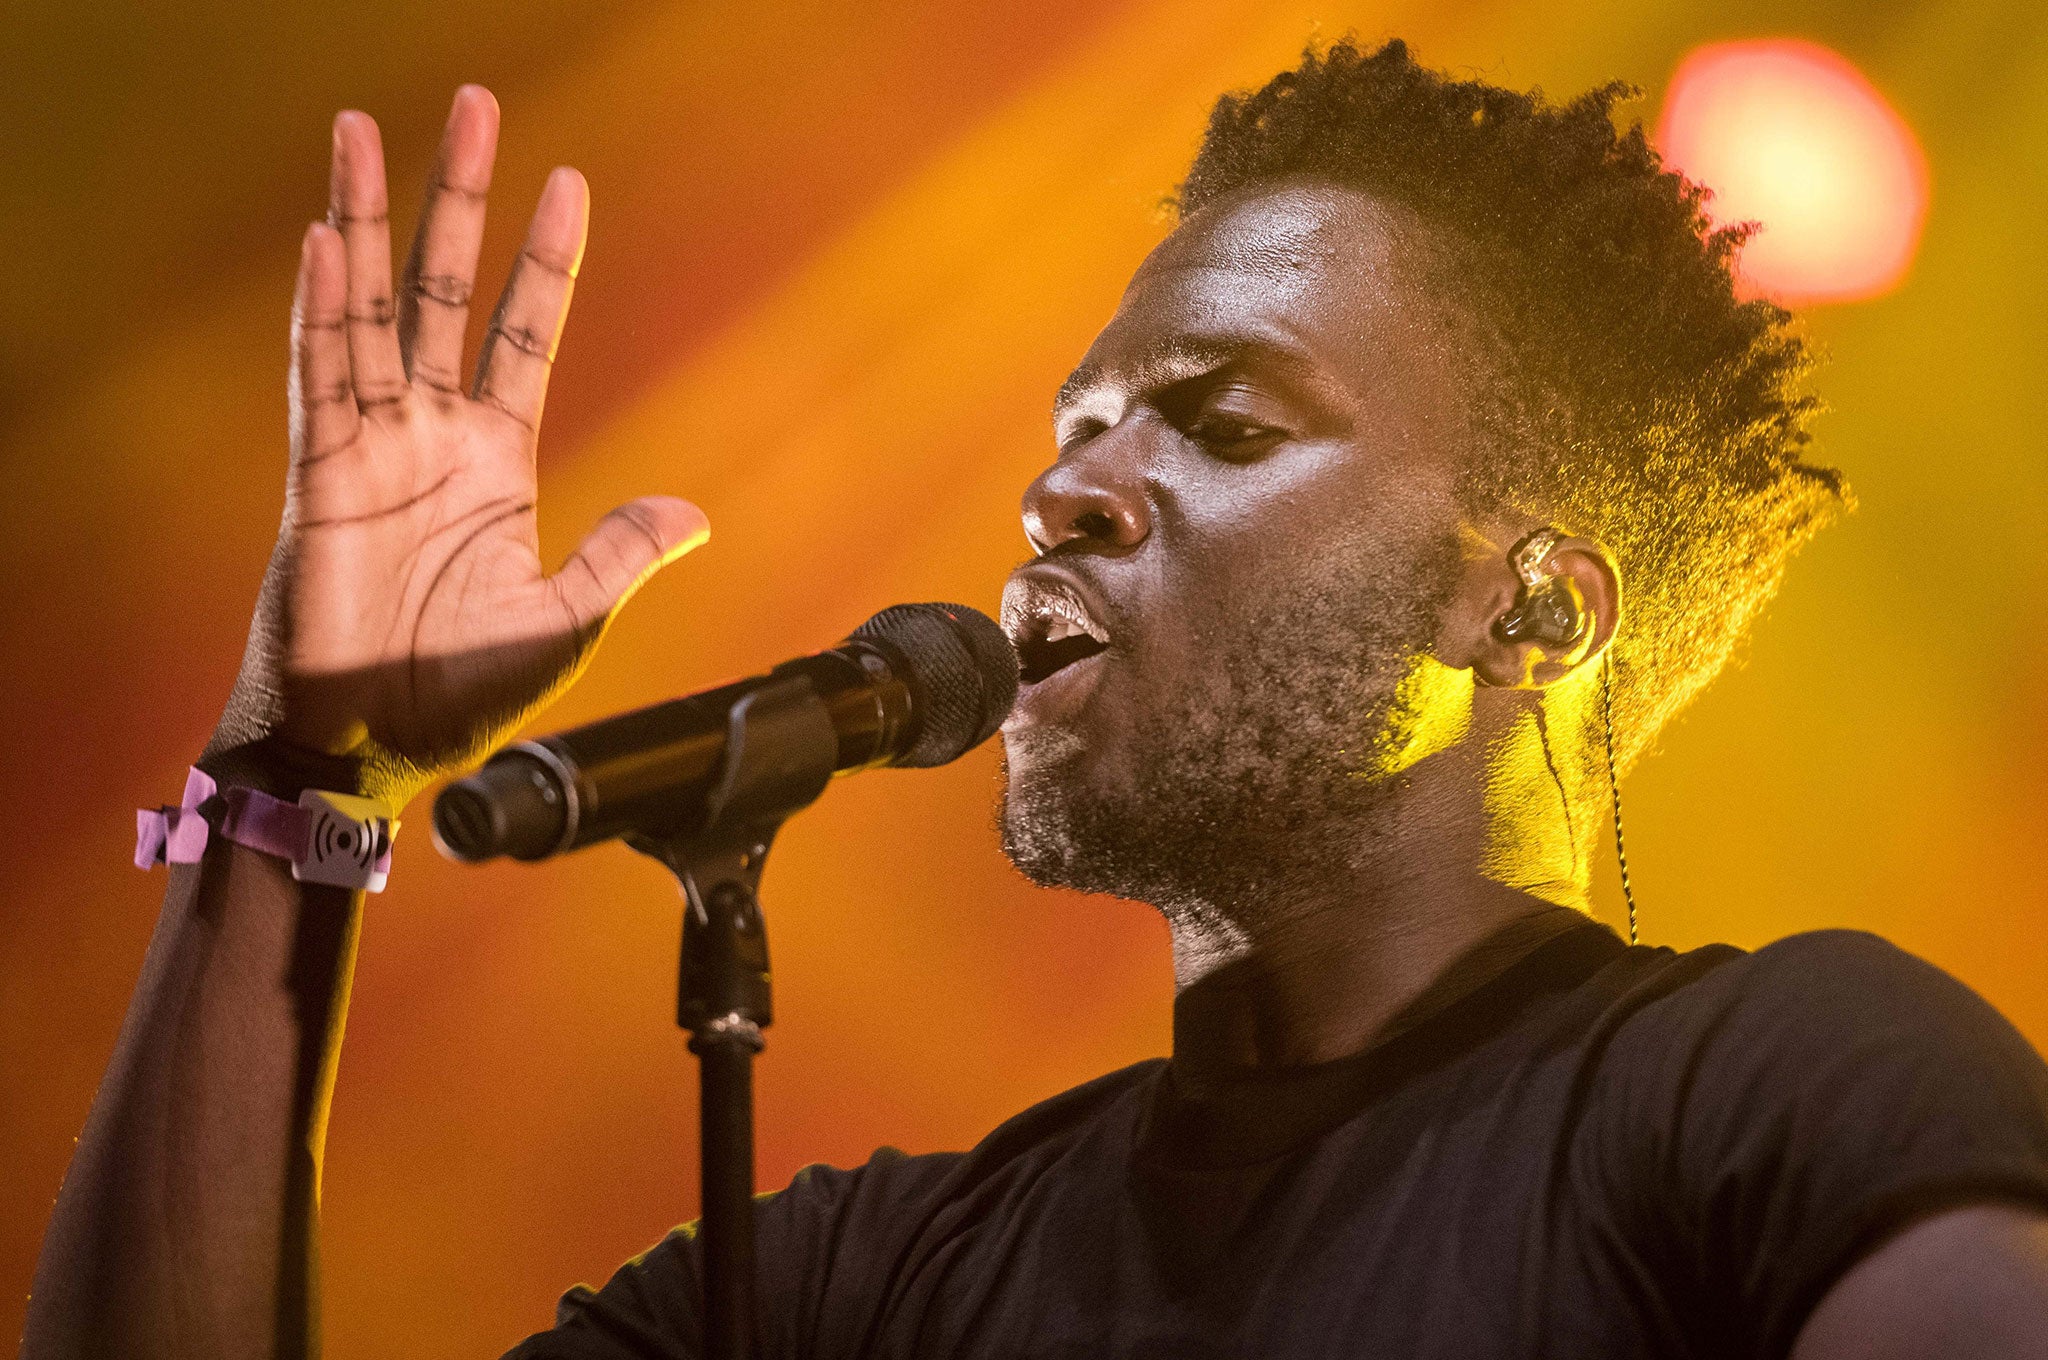 Kwabs performs during the Melt! Festival in Graefenhainichen, Germany, July 2015